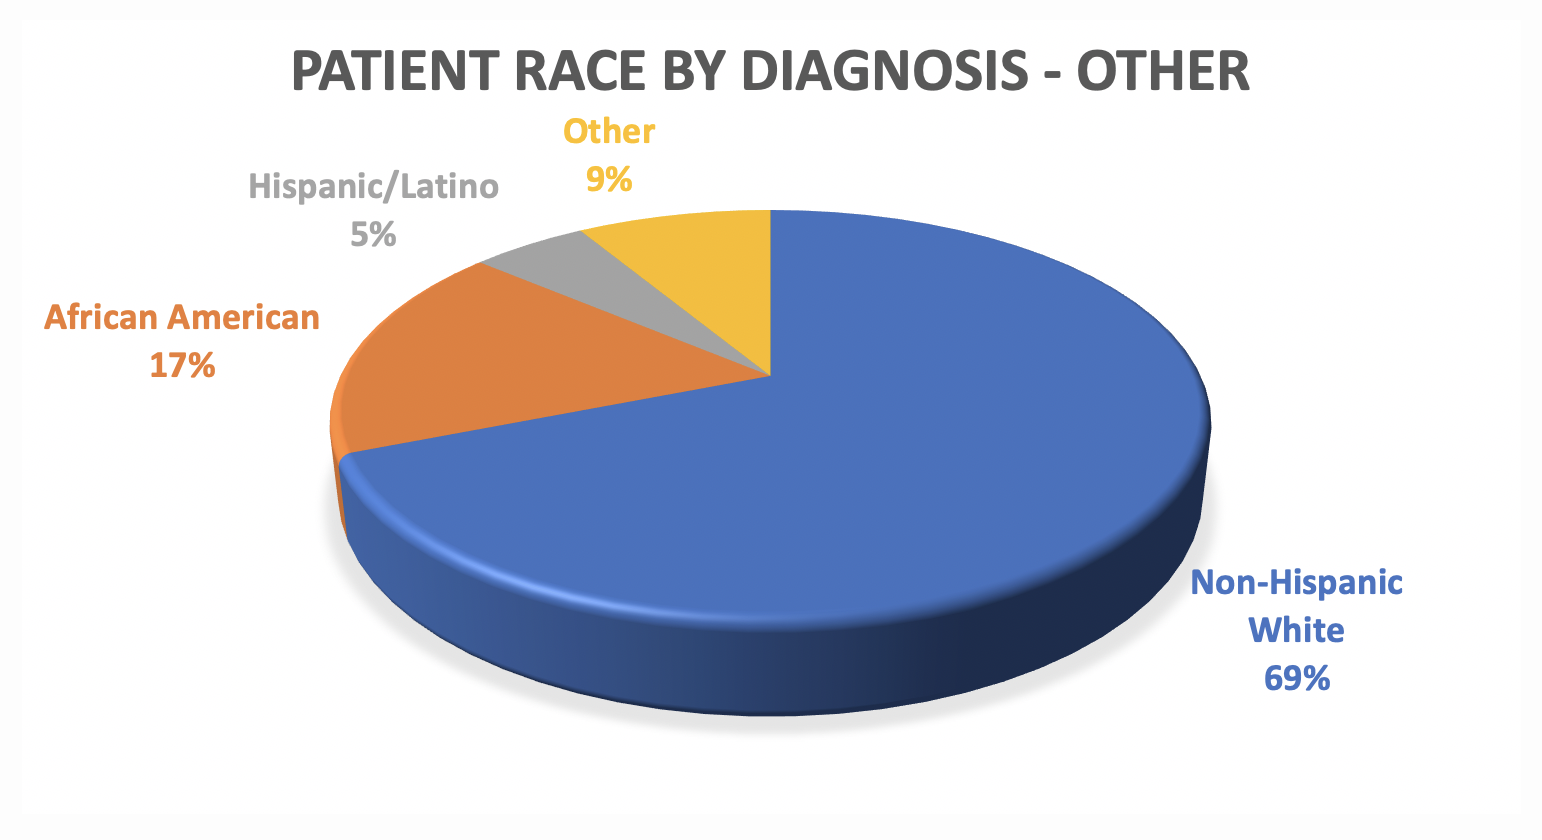 image of pie chart reveals patient race data for other ABI at Pate Rehab